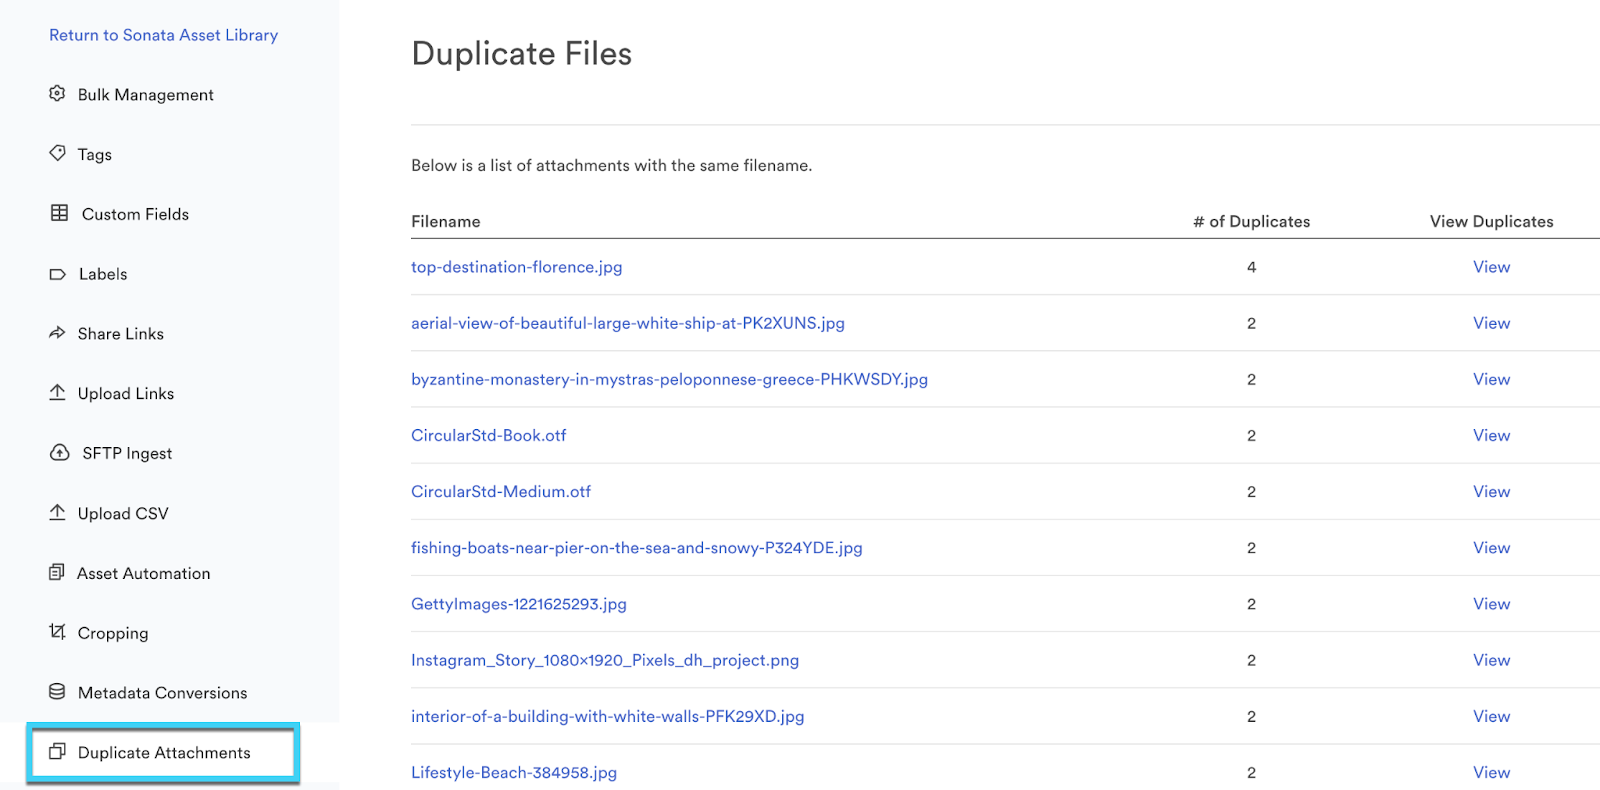 Duplicate files screen within Bulk Management. There is a list of duplicate filenames in the middle and duplicate attachments is highlighted in the left hand navigation.